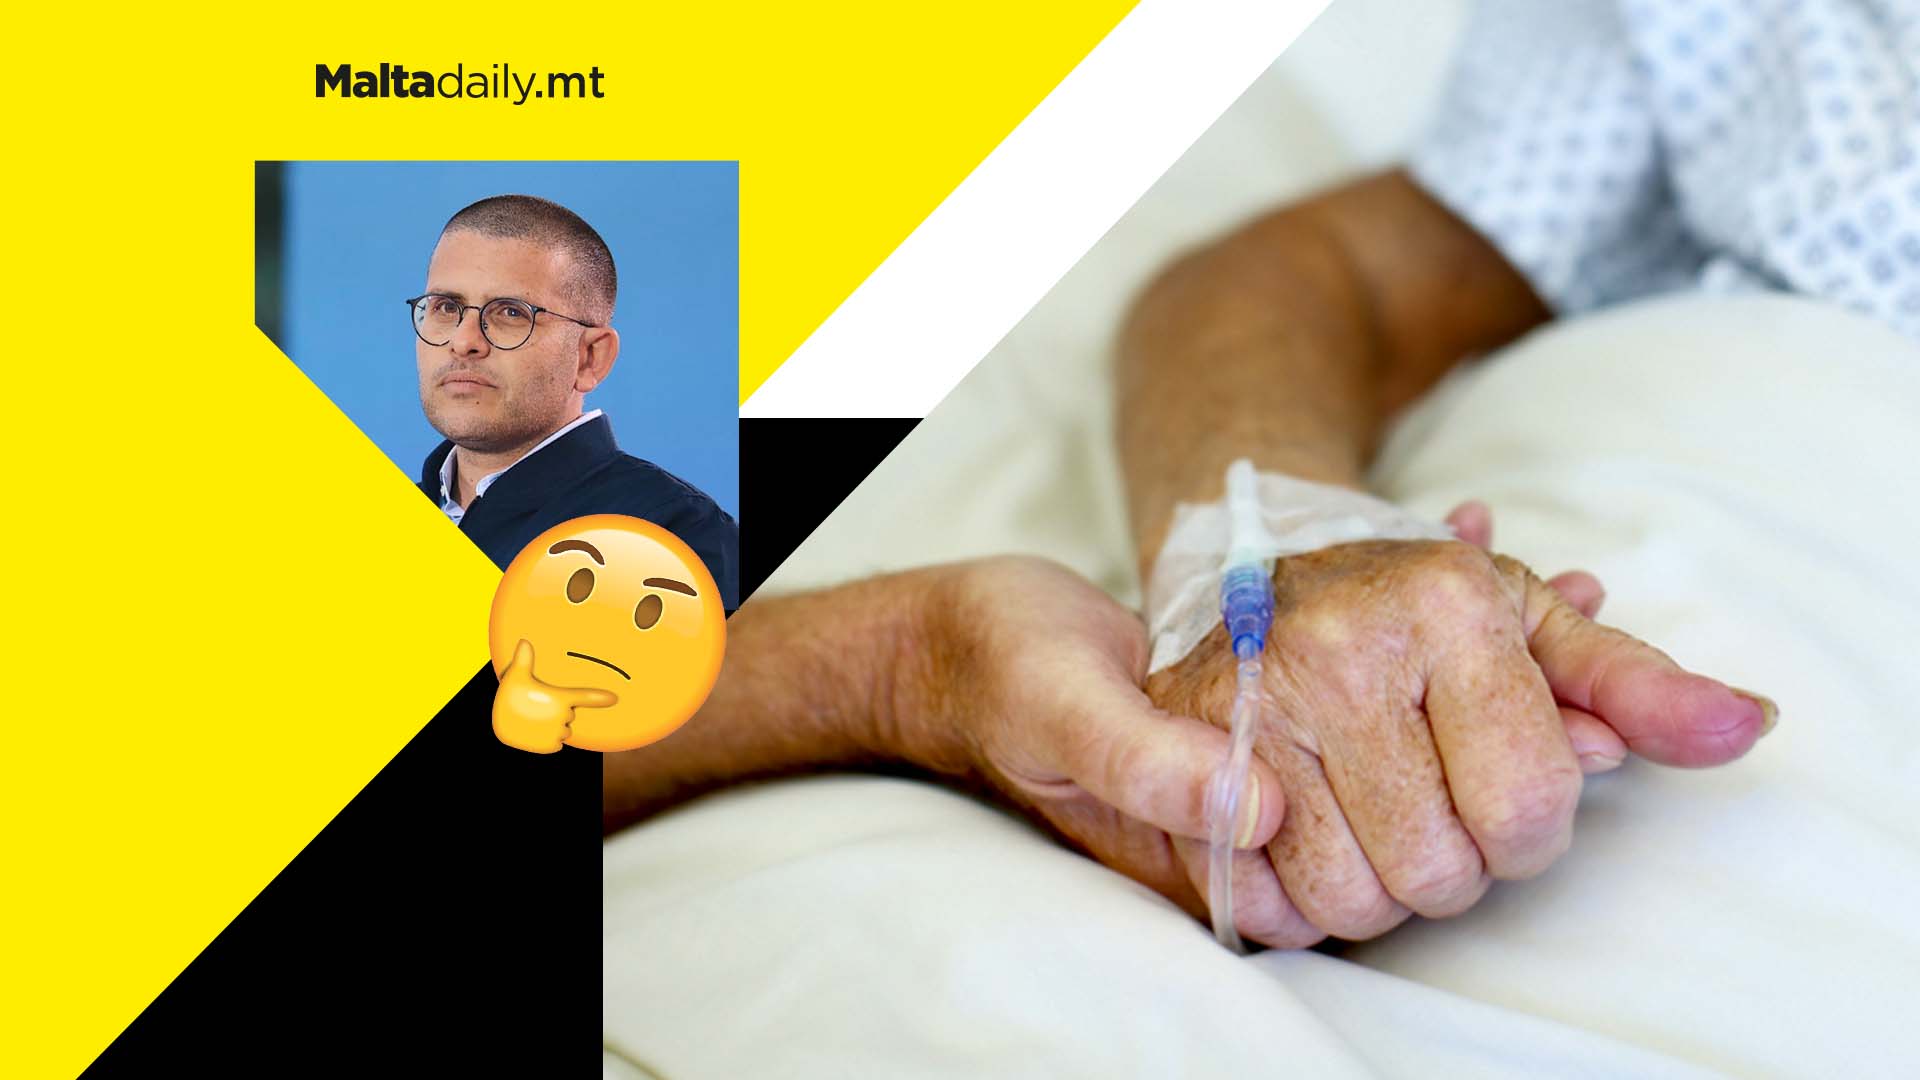 PL to start discussions on voluntary euthanasia for terminally ill patients